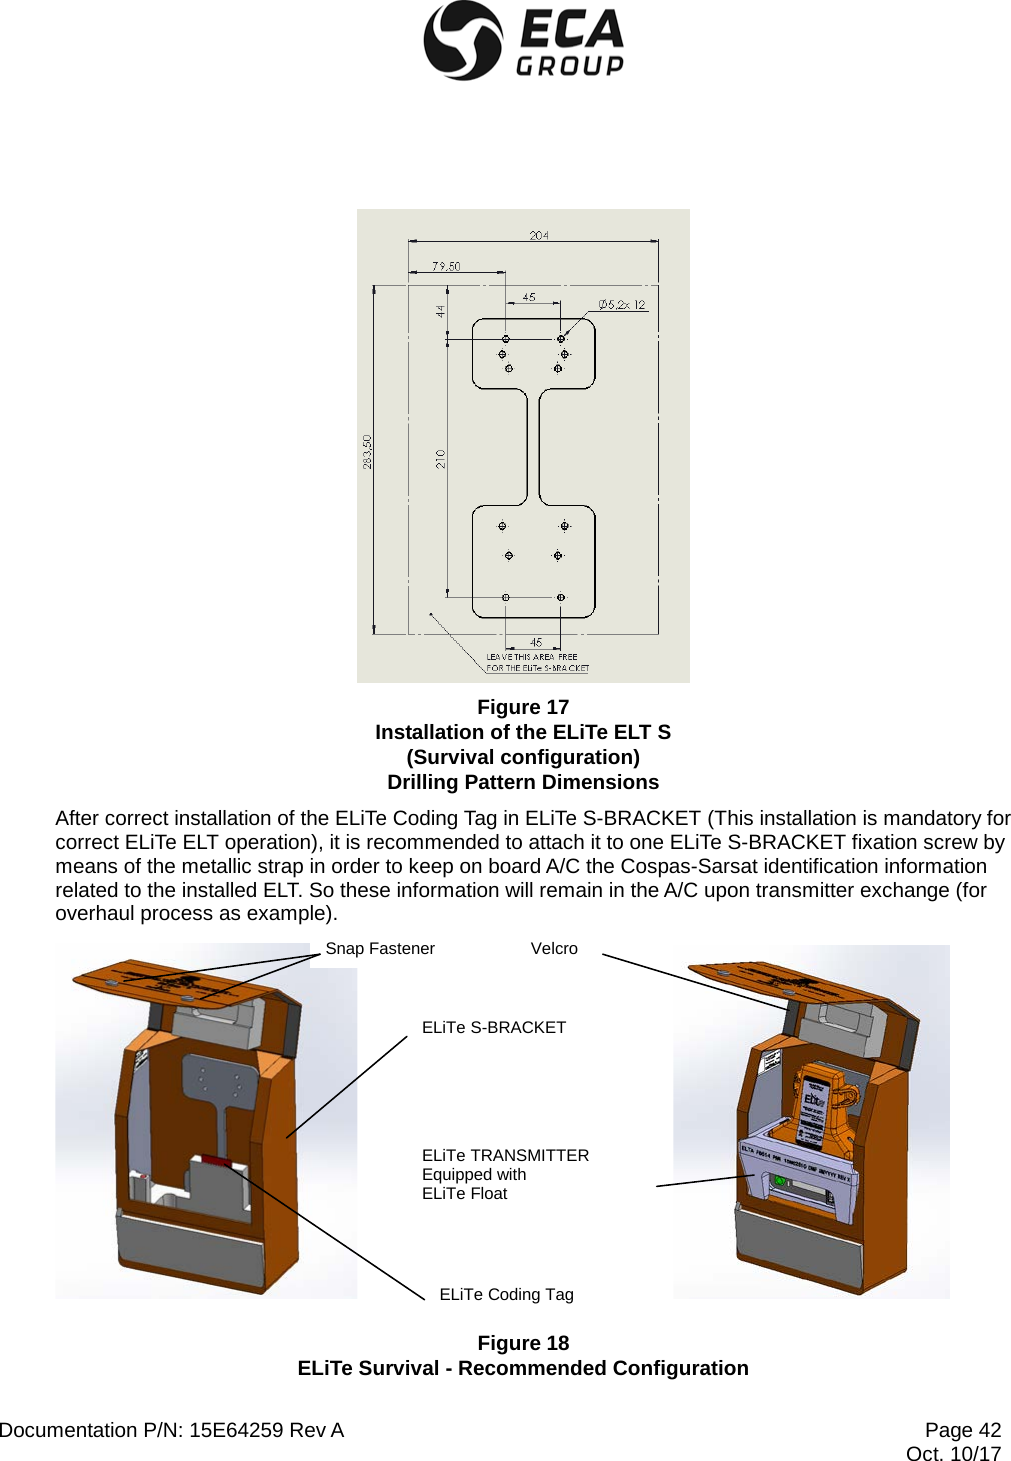  Documentation P/N: 15E64259 Rev A Page 42  Oct. 10/17  Figure 17 Installation of the ELiTe ELT S (Survival configuration) Drilling Pattern Dimensions After correct installation of the ELiTe Coding Tag in ELiTe S-BRACKET (This installation is mandatory for correct ELiTe ELT operation), it is recommended to attach it to one ELiTe S-BRACKET fixation screw by means of the metallic strap in order to keep on board A/C the Cospas-Sarsat identification information related to the installed ELT. So these information will remain in the A/C upon transmitter exchange (for overhaul process as example).            Figure 18 ELiTe Survival - Recommended Configuration ELiTe S-BRACKET ELiTe Coding Tag ELiTe TRANSMITTER Equipped with ELiTe Float Velcro Snap Fastener 